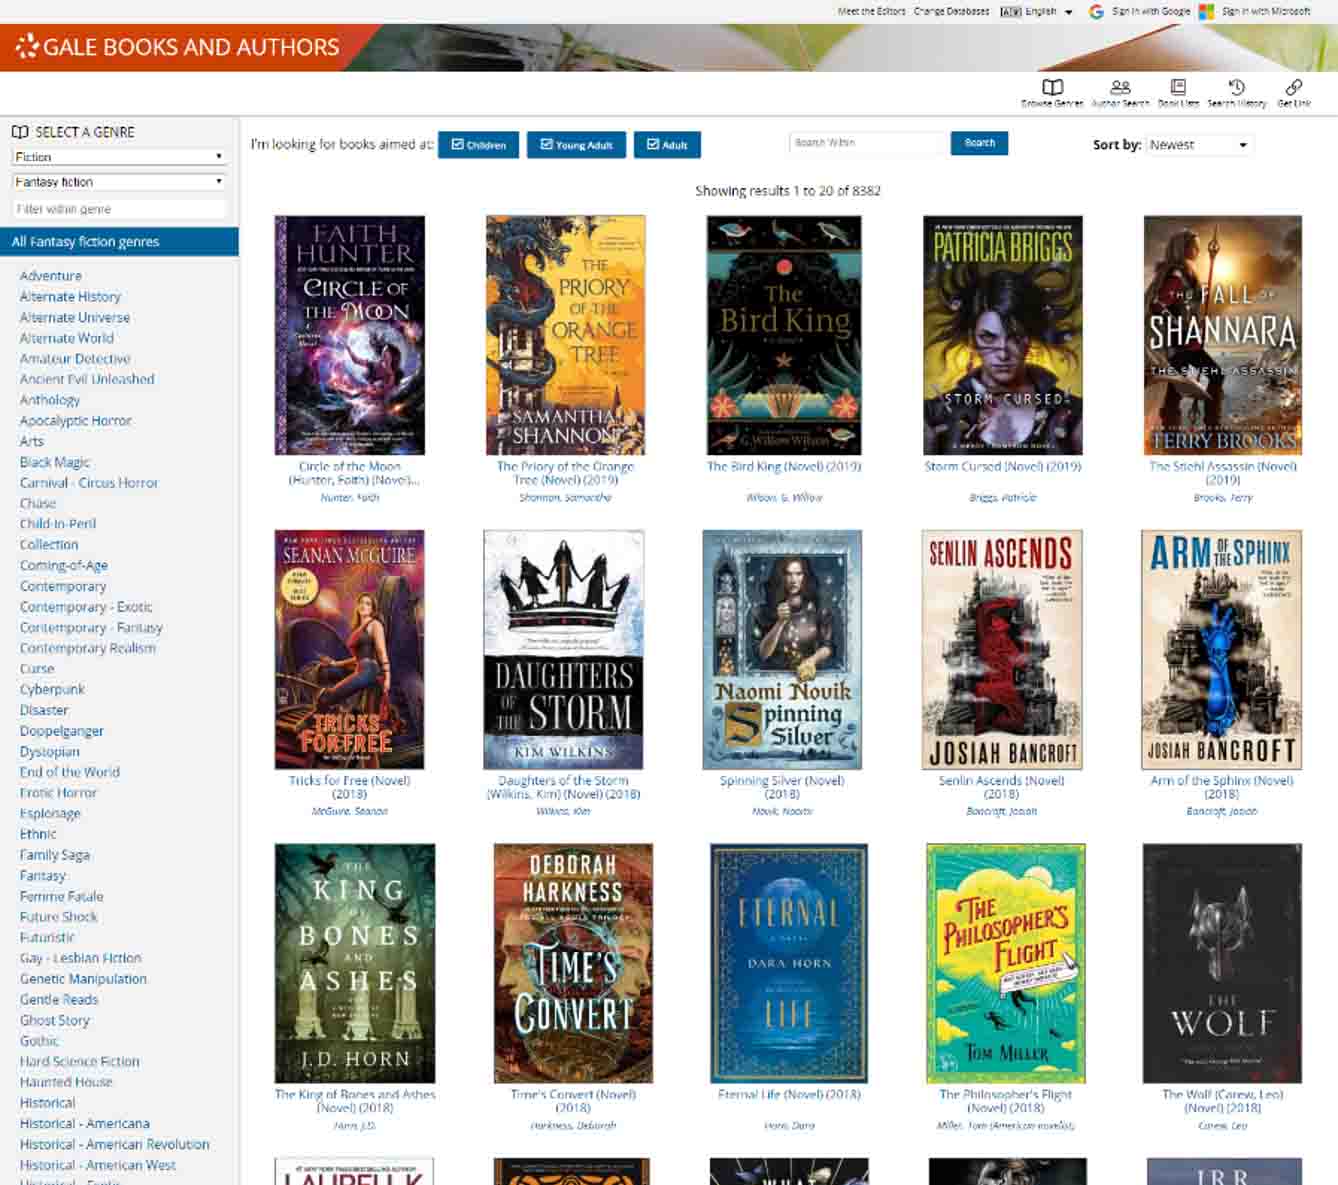 Gale Books and Authors browse by genre feature.